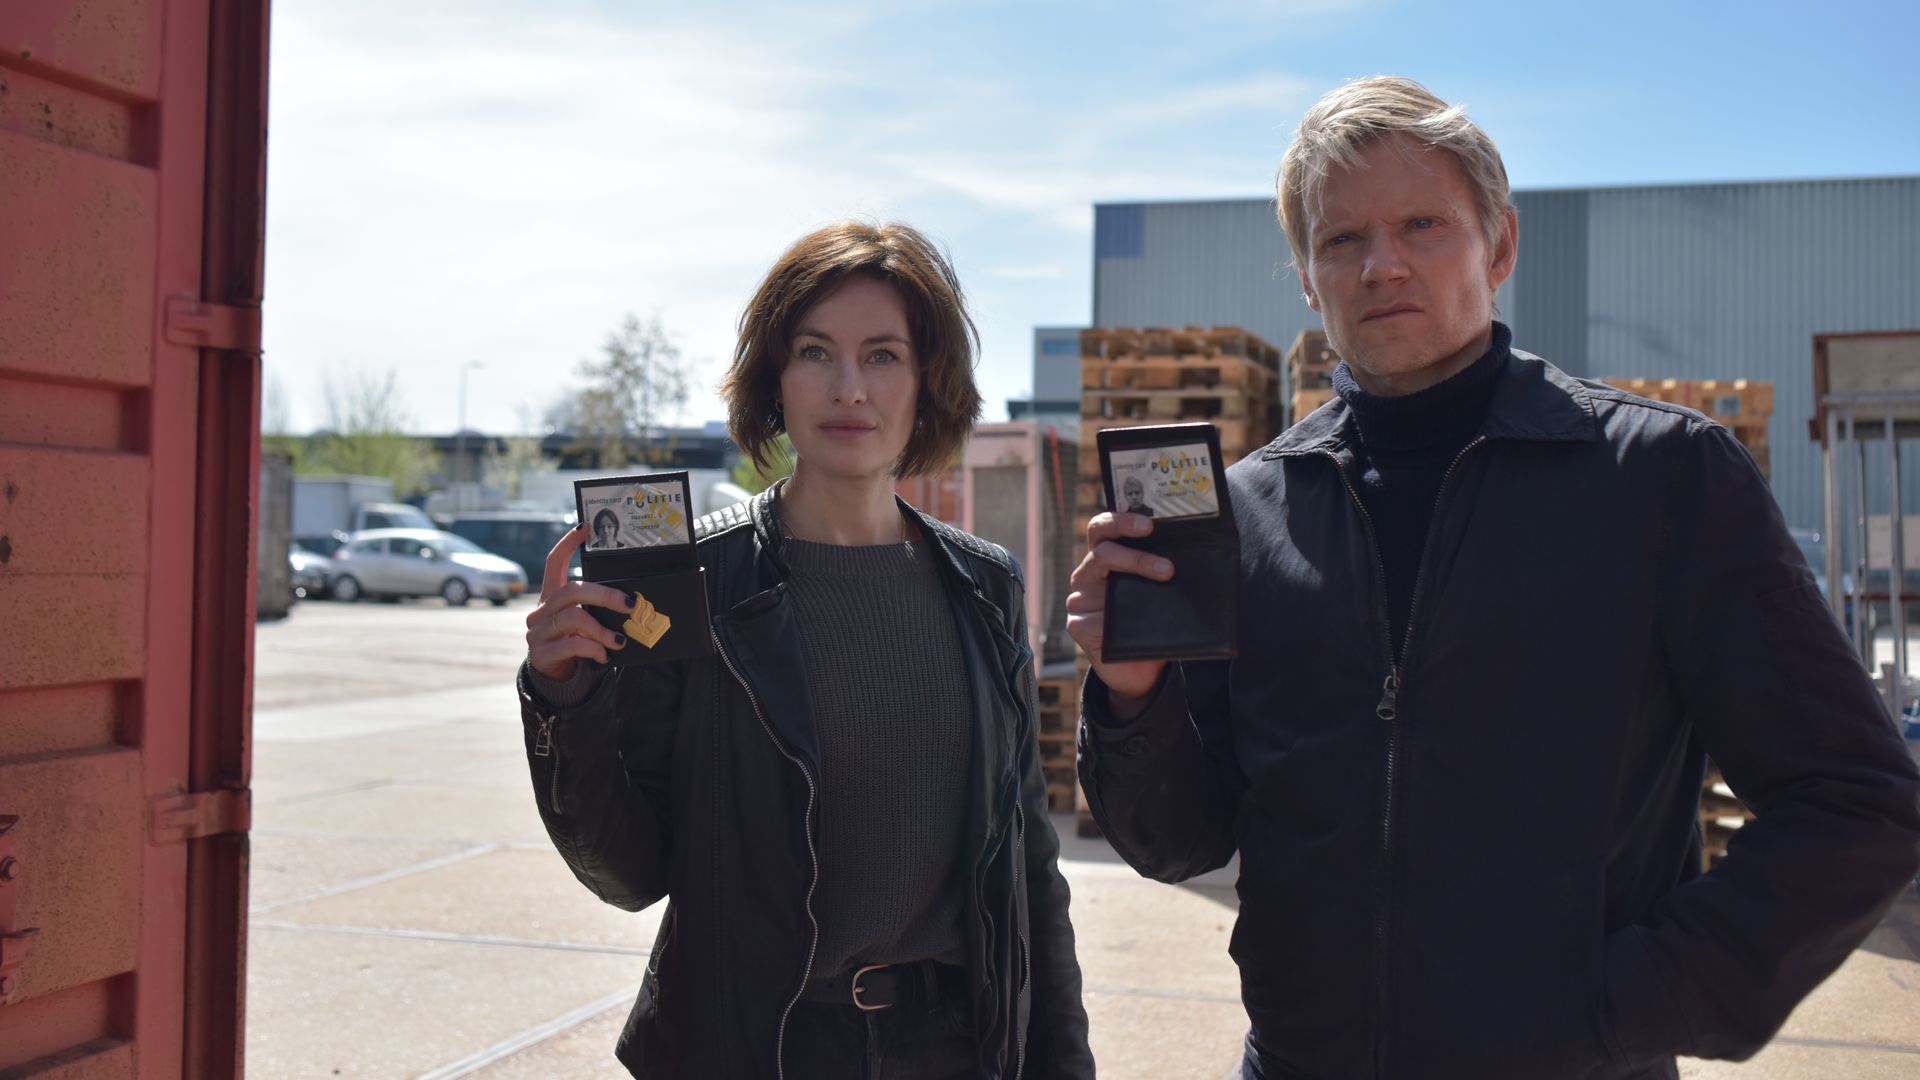 Marc Warren as Van Der Valk and Maimie McCoy as Lucienne Hassell.

